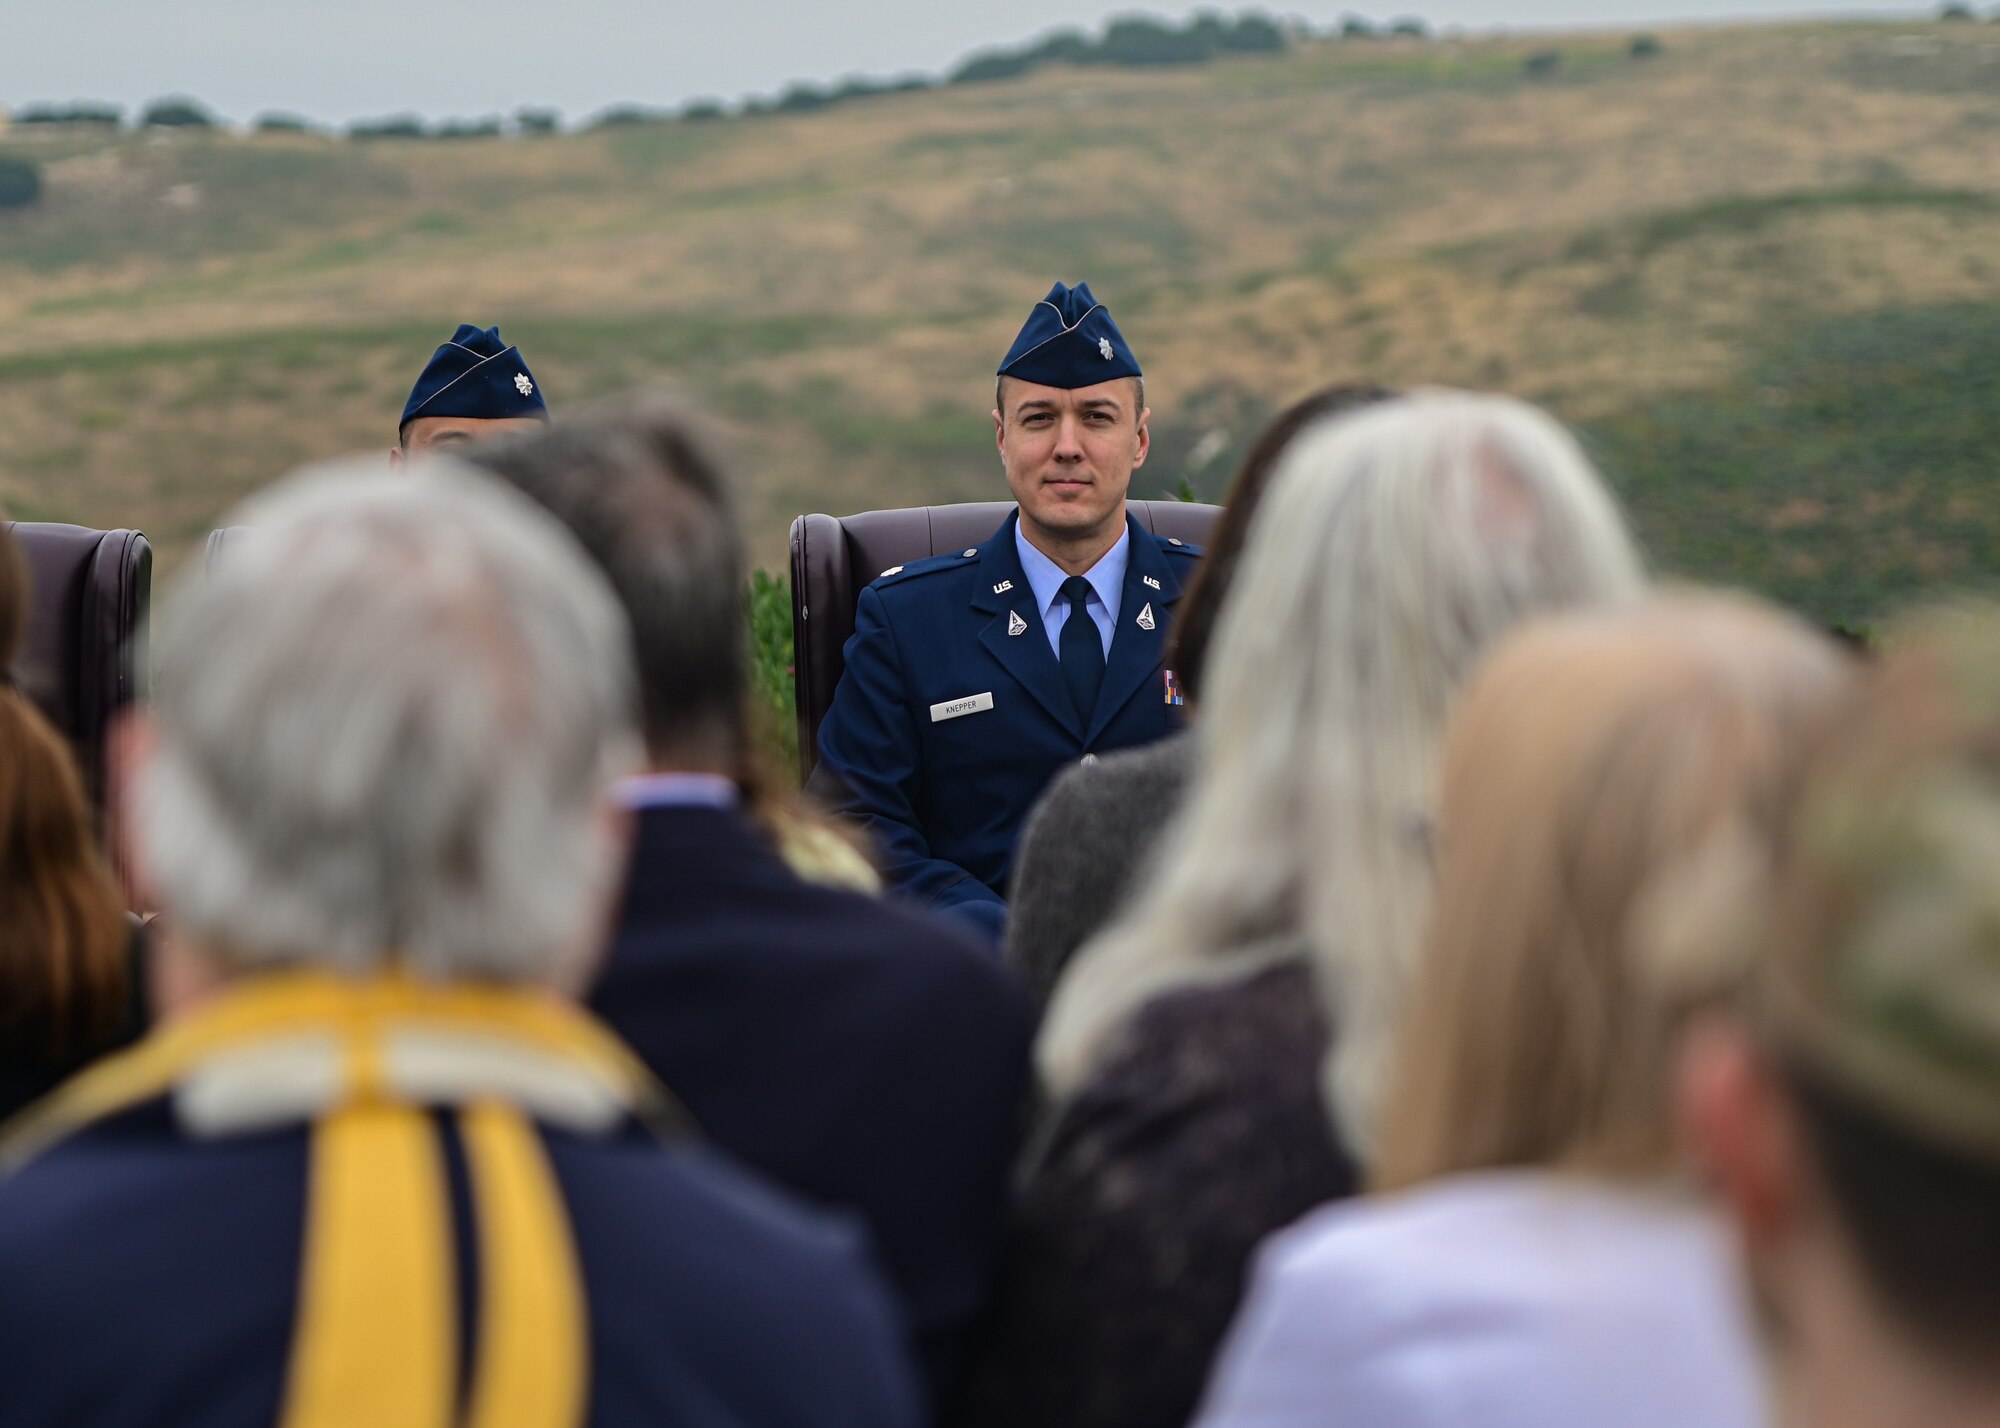 U.S. Space Force Lt. Col. Matthew Knepper, incoming 21st Space Operation Squadron commander, looks into the crowd during a change of command ceremony on Vandenberg Space Force Base, Calif., June 9, 2023. Knepper assumed command of the 21st SOPS, taking the place of Lt. Col. Justin Roque. (U.S. Space Force Photo by Airman 1st Class Ryan Quijas)